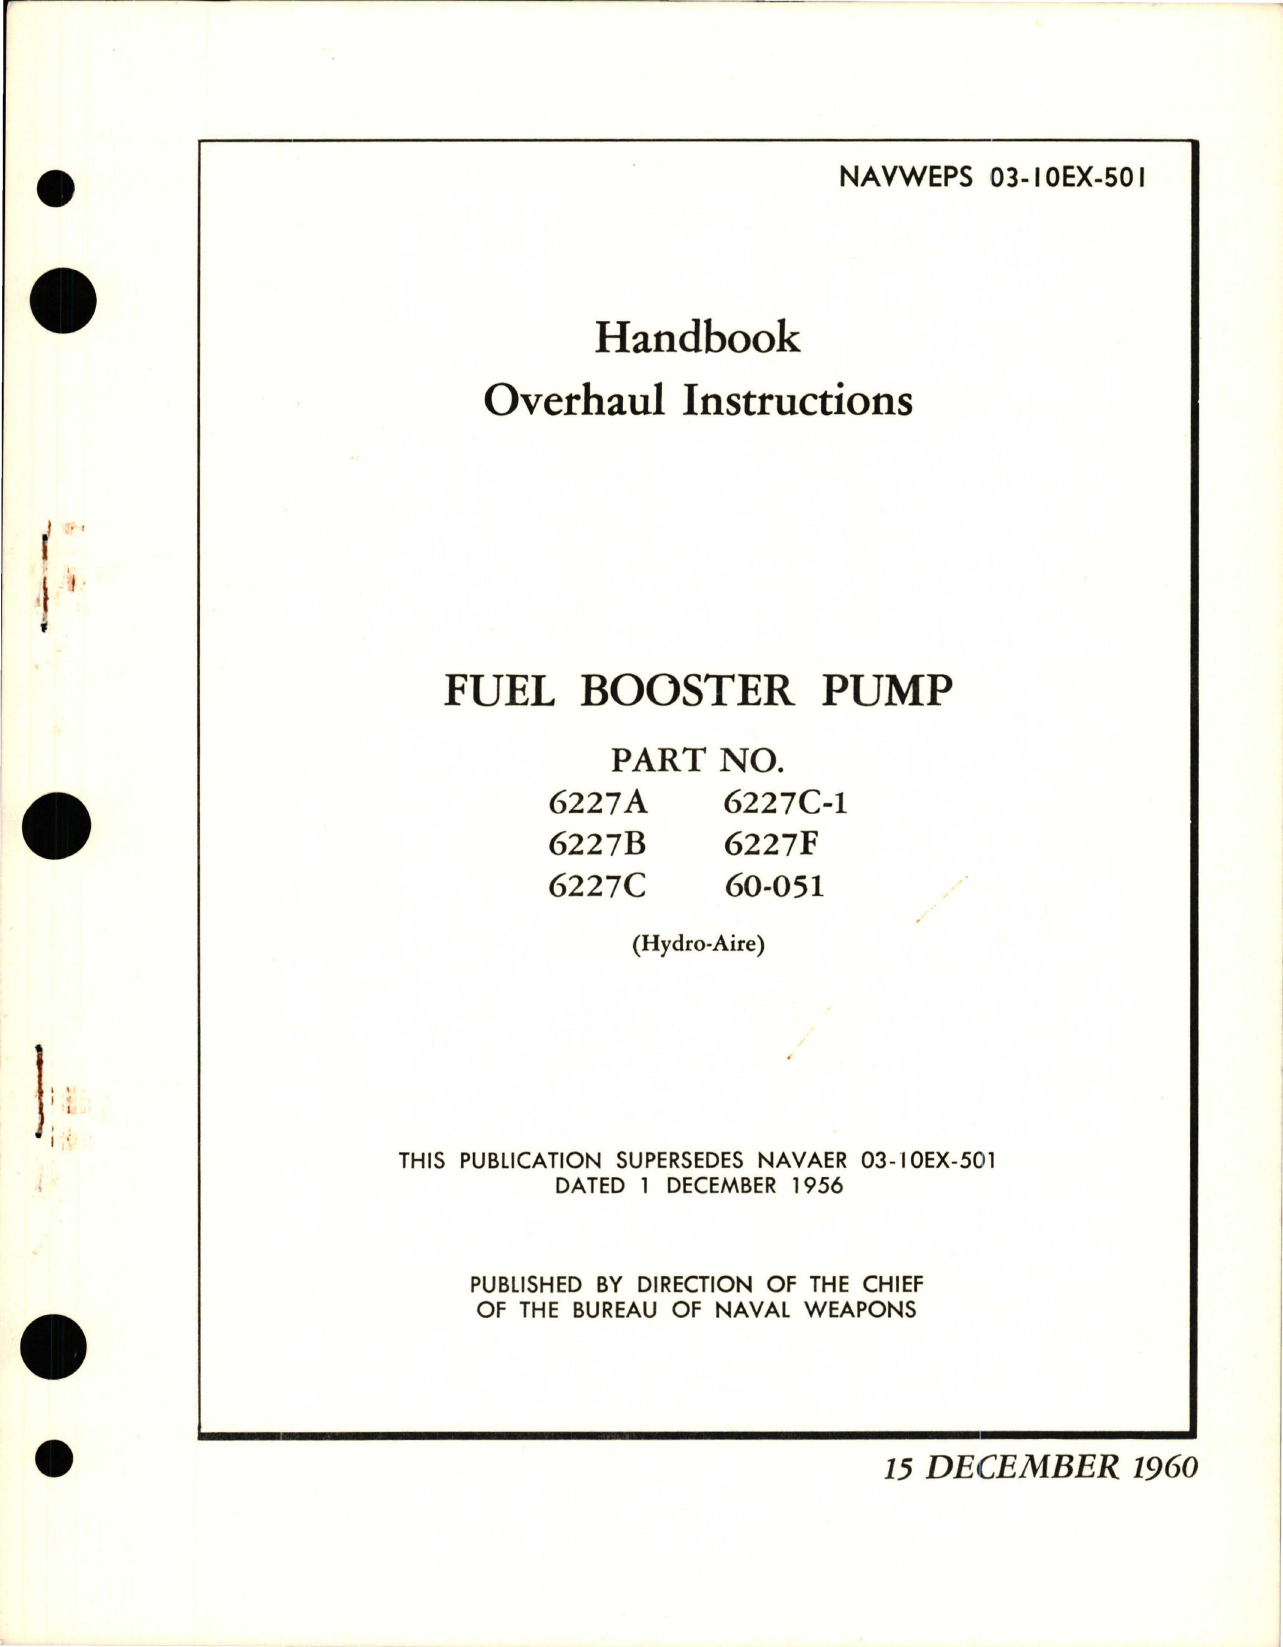 Sample page 1 from AirCorps Library document: Overhaul Instructions for Fuel Booster Pump